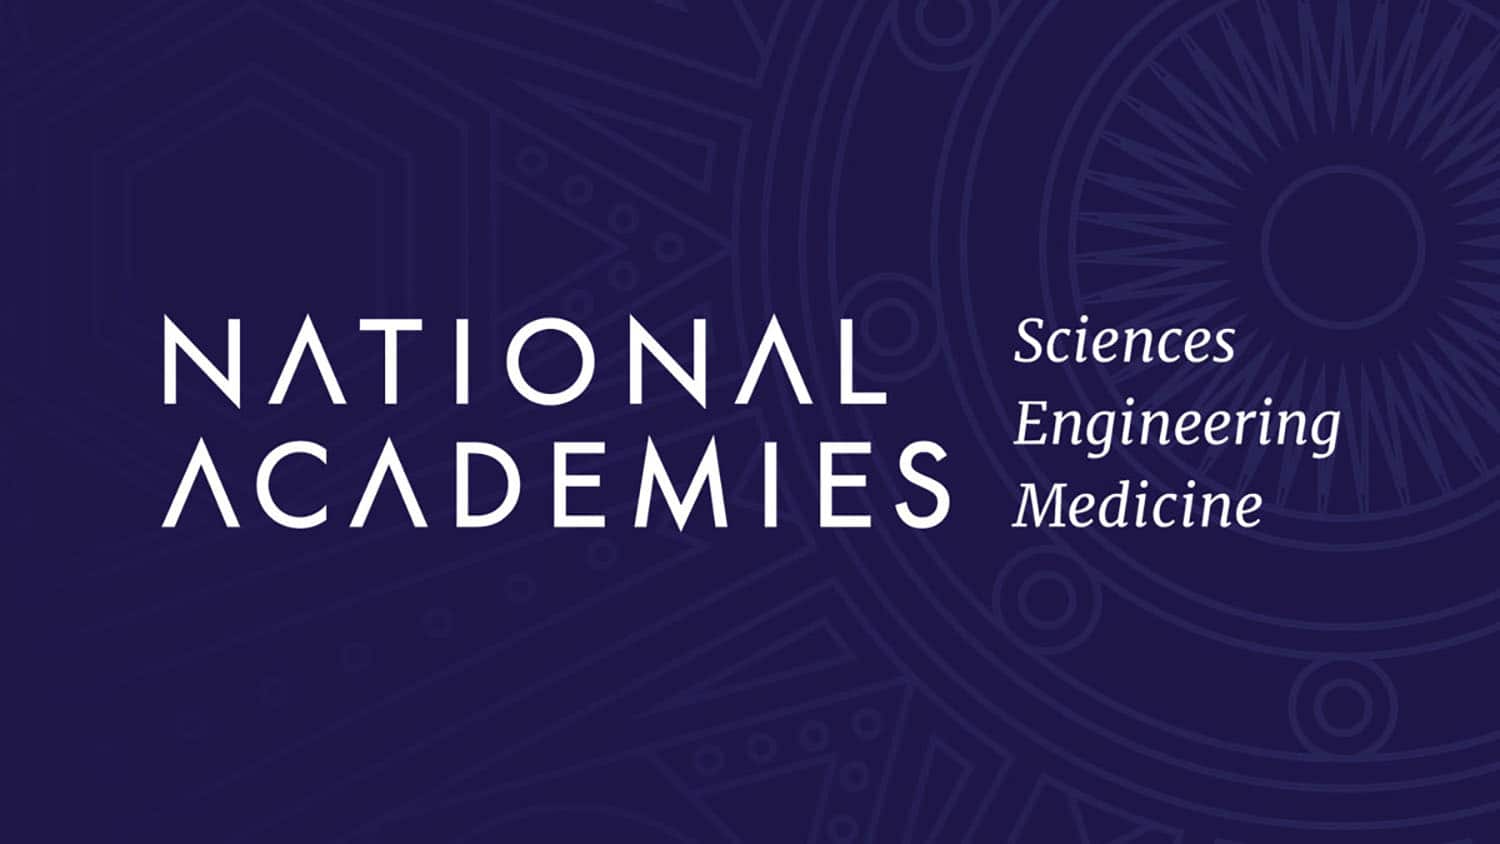 National Academies of Science, Engineering and Medicine logo. White lettering on dark blue background.